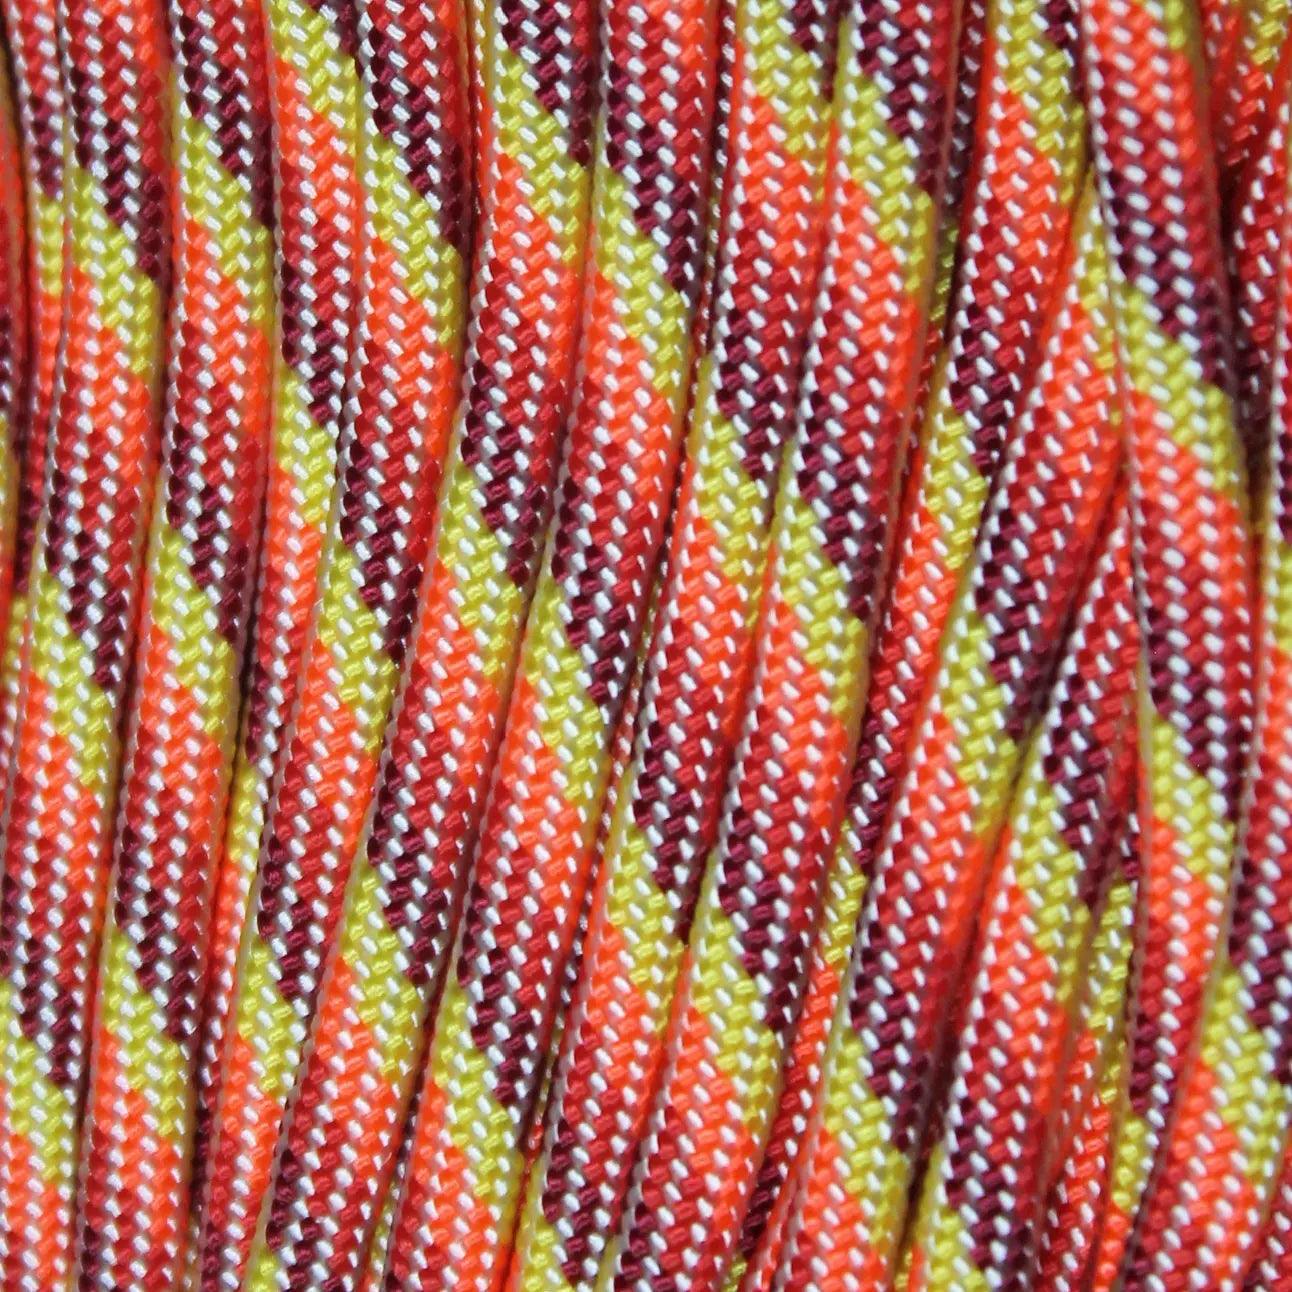 550 Paracord Sunset Made in the USA Nylon/Nylon (100 FT.) - Paracord Galaxy